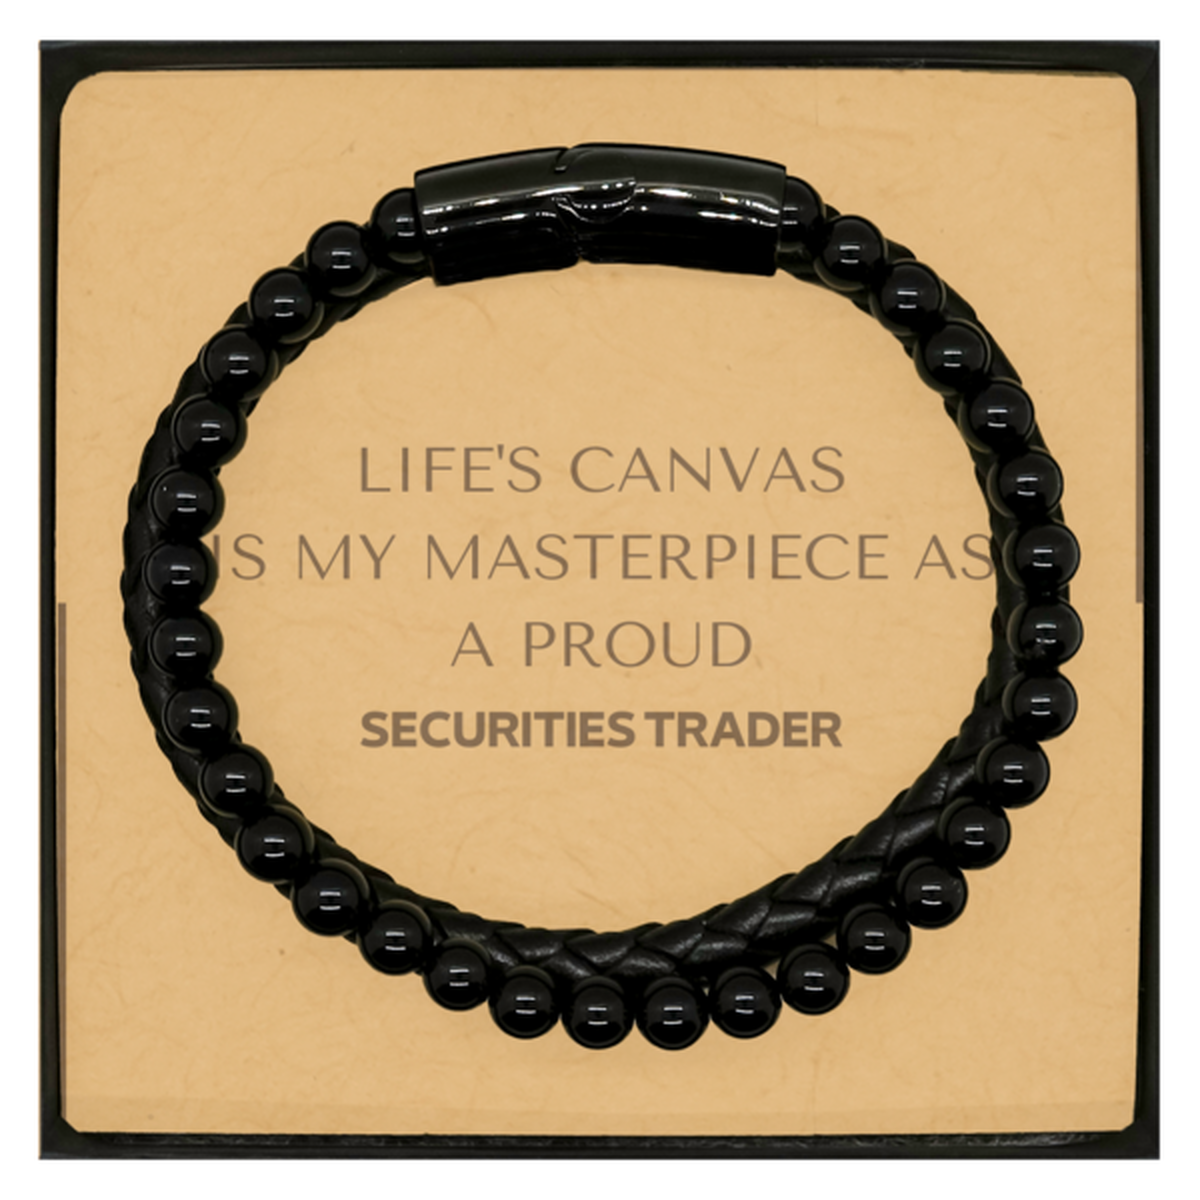 Proud Securities Trader Gifts, Life's canvas is my masterpiece, Epic Birthday Christmas Unique Stone Leather Bracelets For Securities Trader, Coworkers, Men, Women, Friends